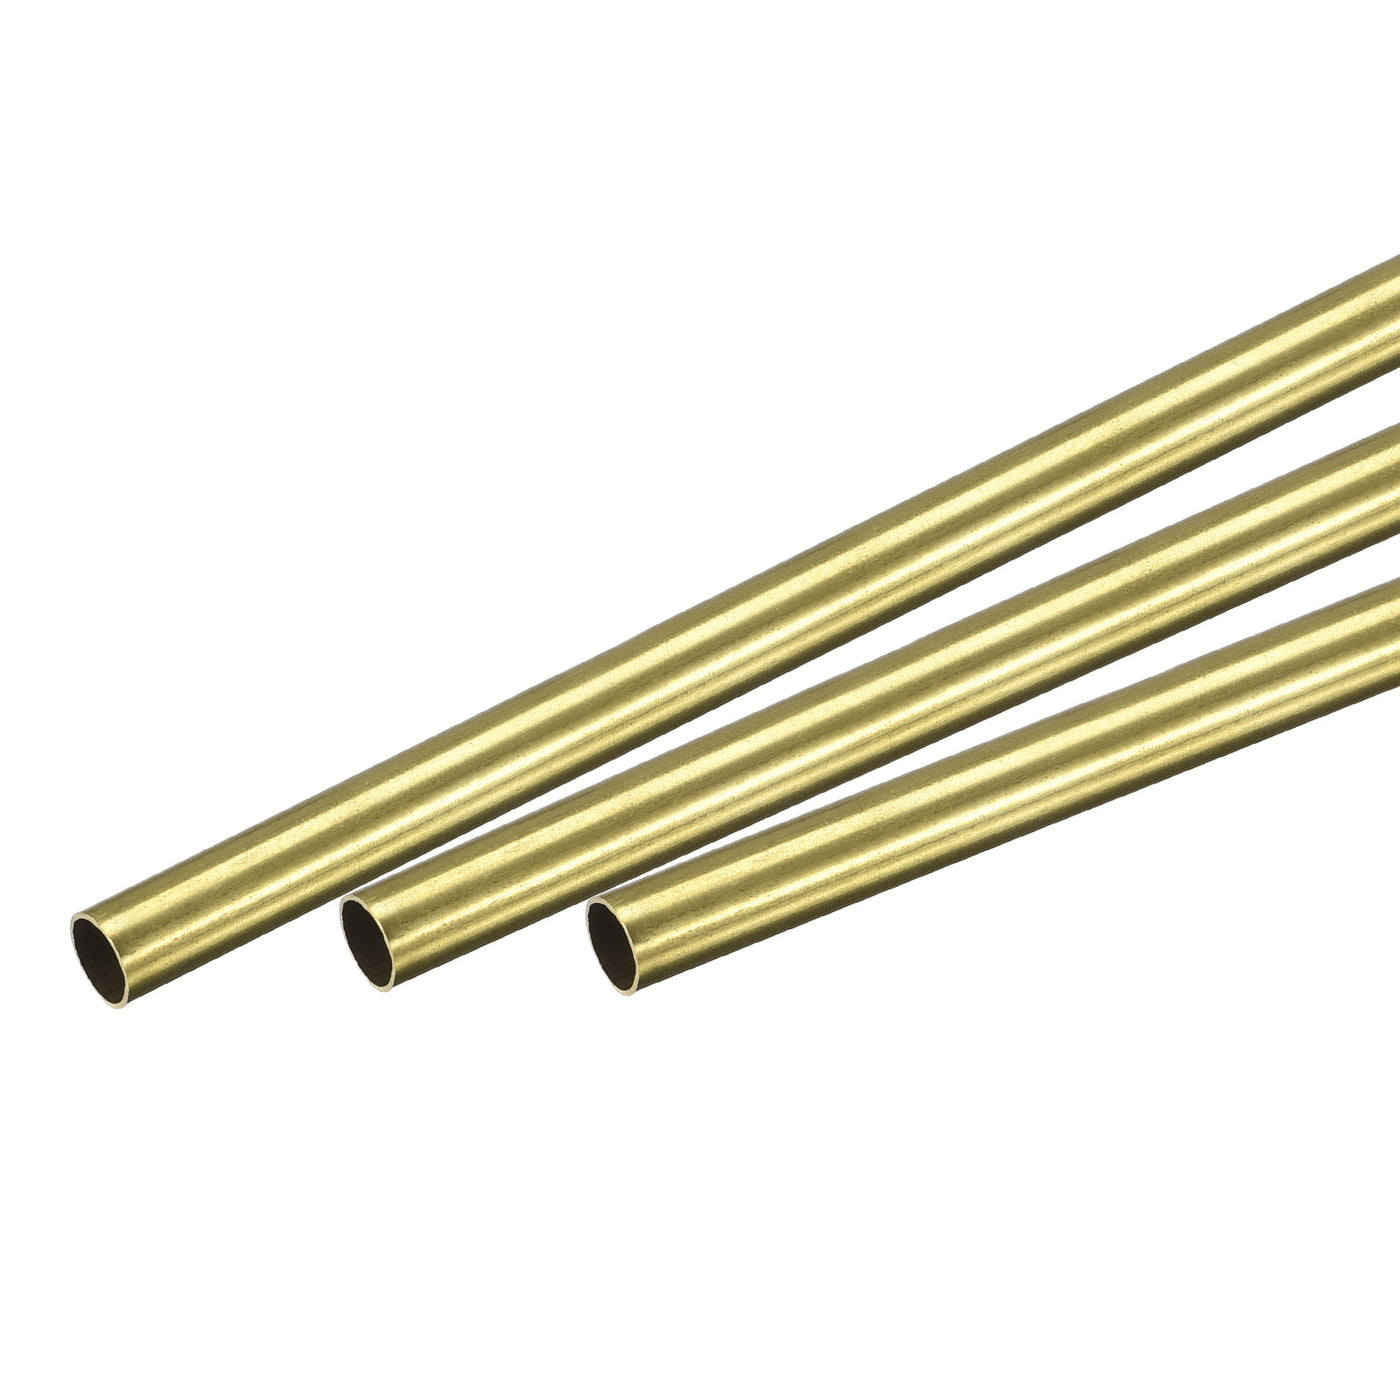 uxcell Uxcell 3Pcs 5mm x 0.2mm x 400mm Seamless Straight Brass Tube for Industry DIY Projects